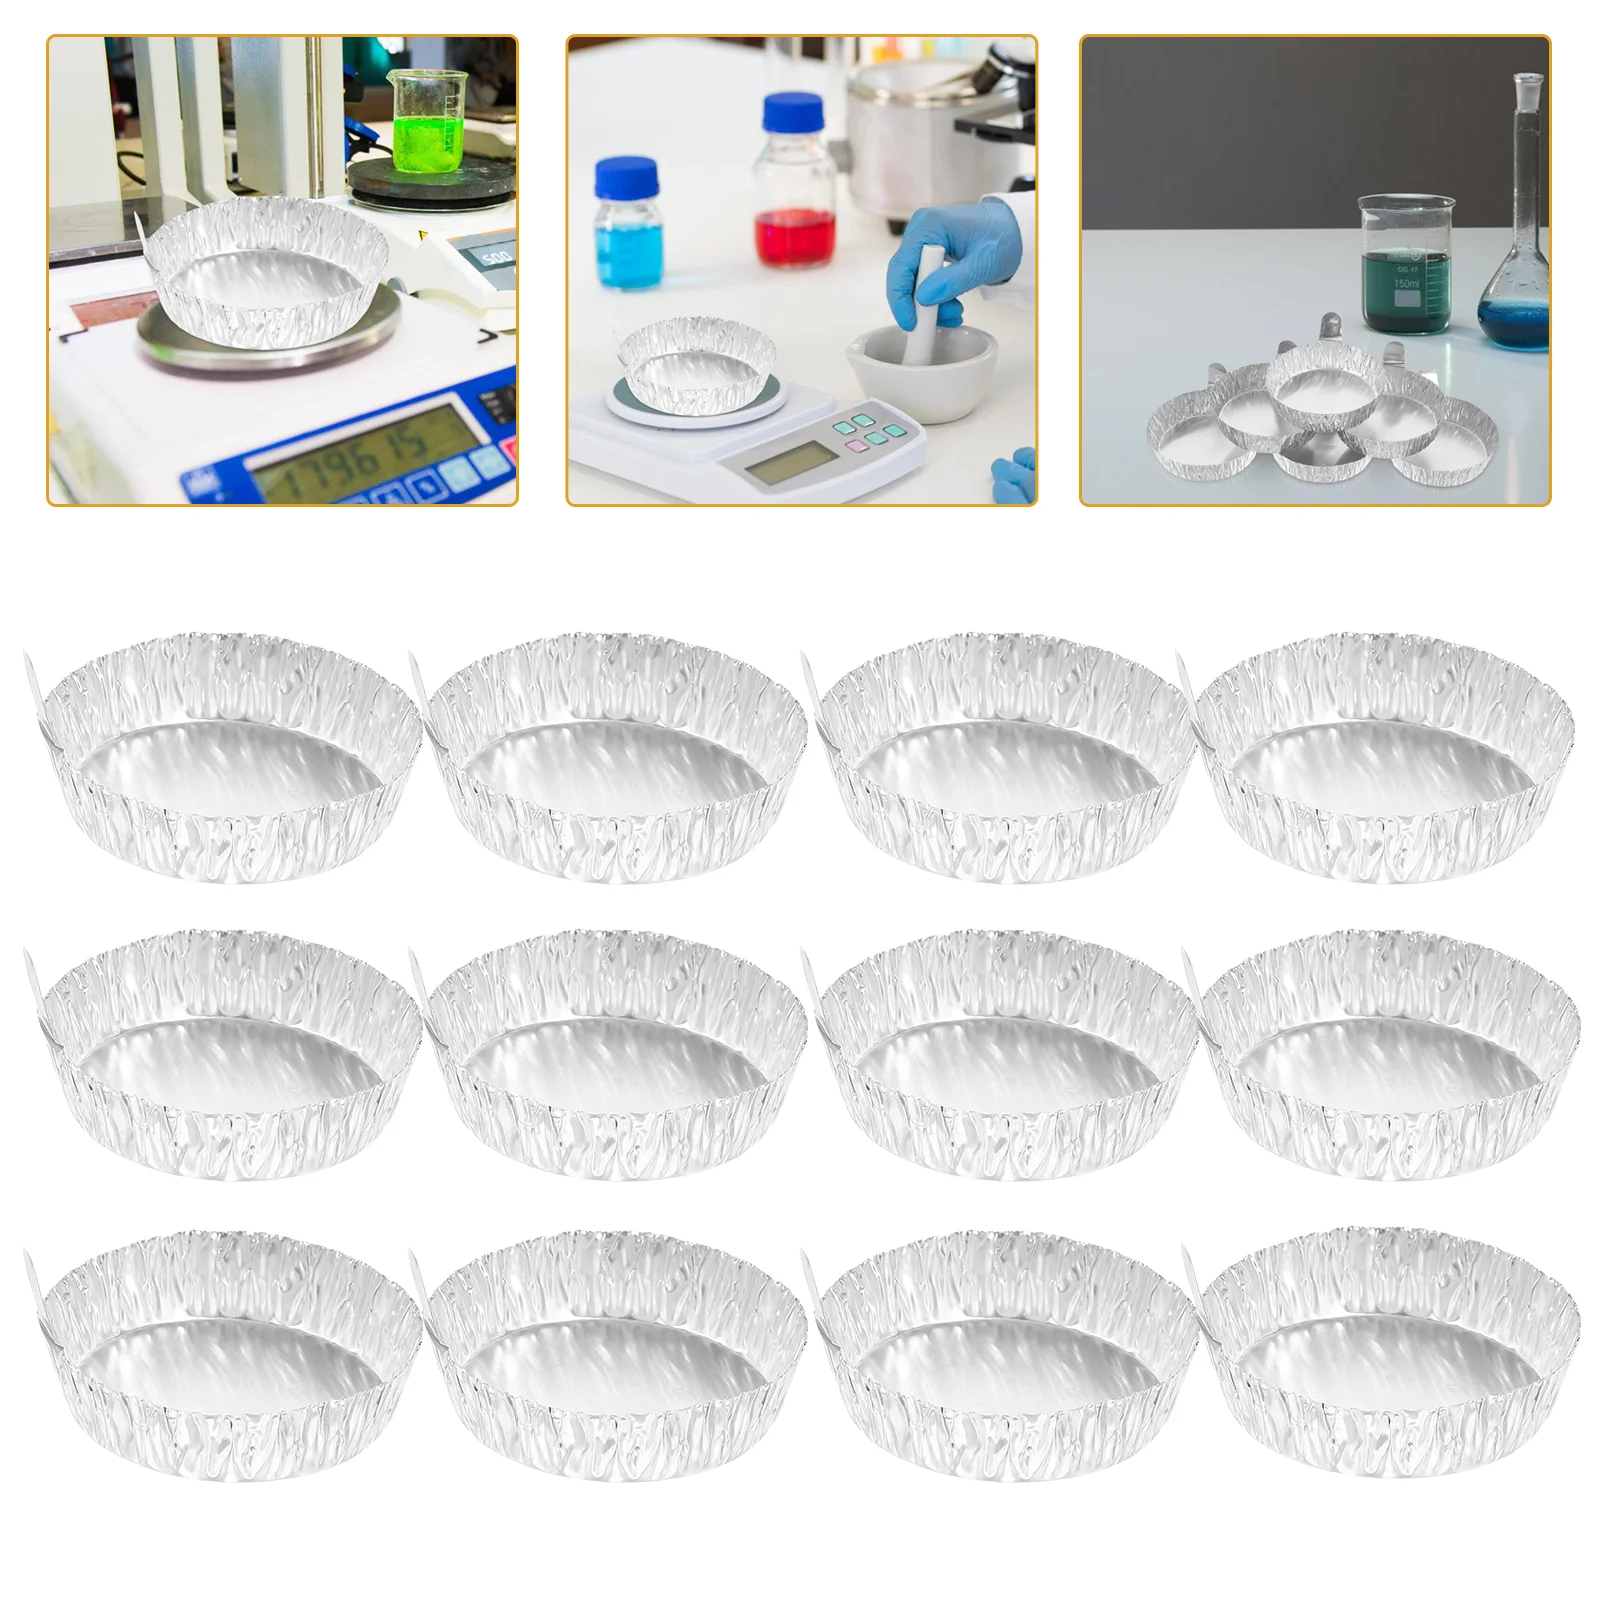 

100 Pcs Aluminum Foil Weighing Dish Surface Plate Boats Lab Equipment Caliber Labs Supplies Measuring Sample Tray Plates Dishes